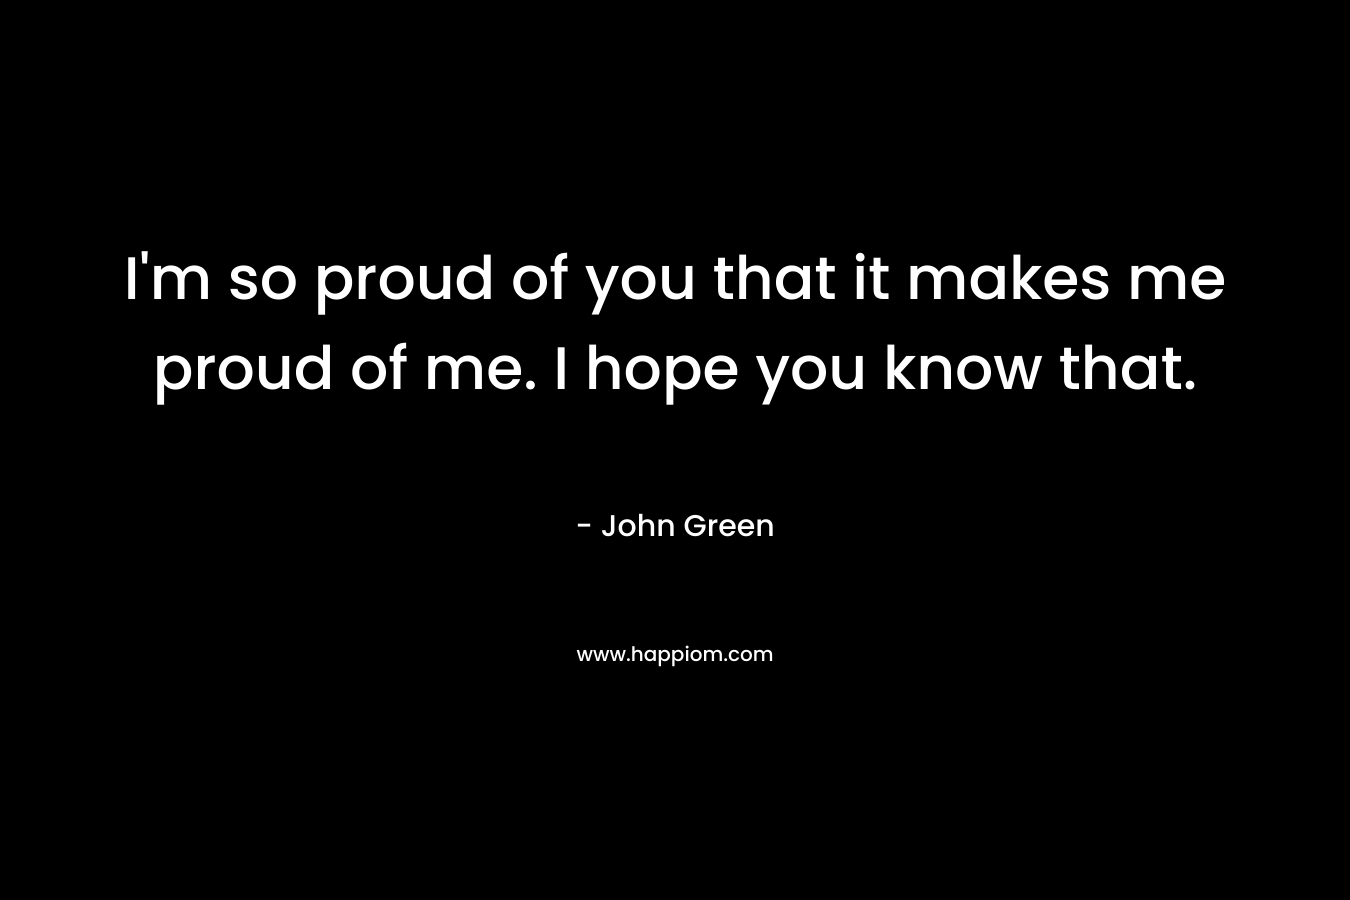 I'm so proud of you that it makes me proud of me. I hope you know that.